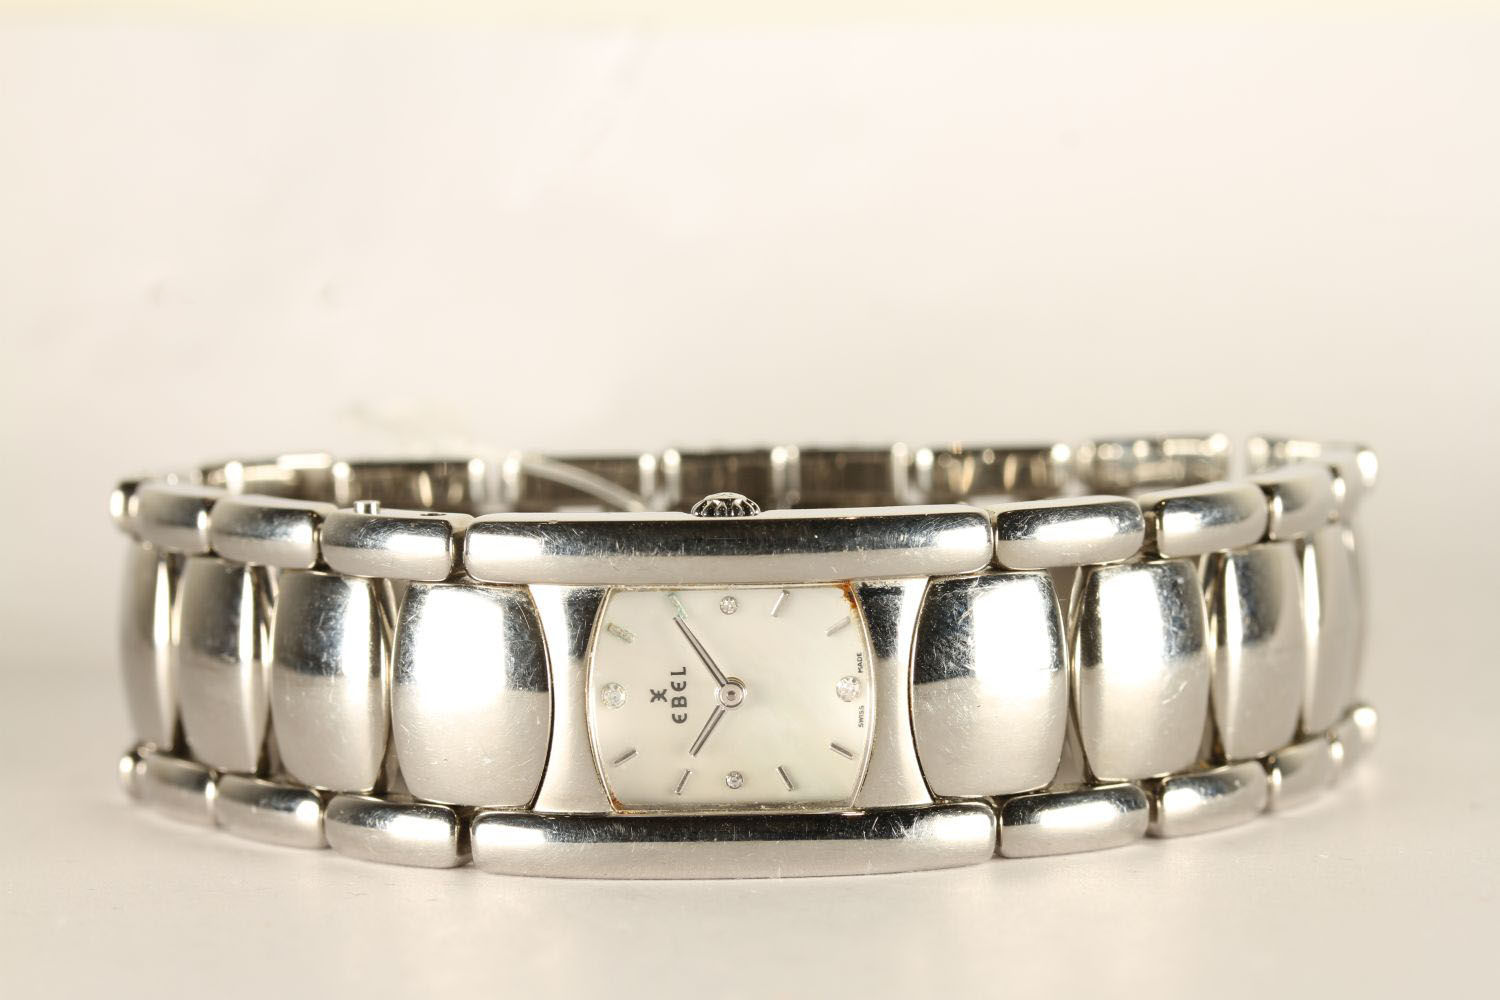 LADIES EBEL BELUGA DIAMOND DOT DIAL WRISTWATCH, rounded square mother of pearl dial with silver